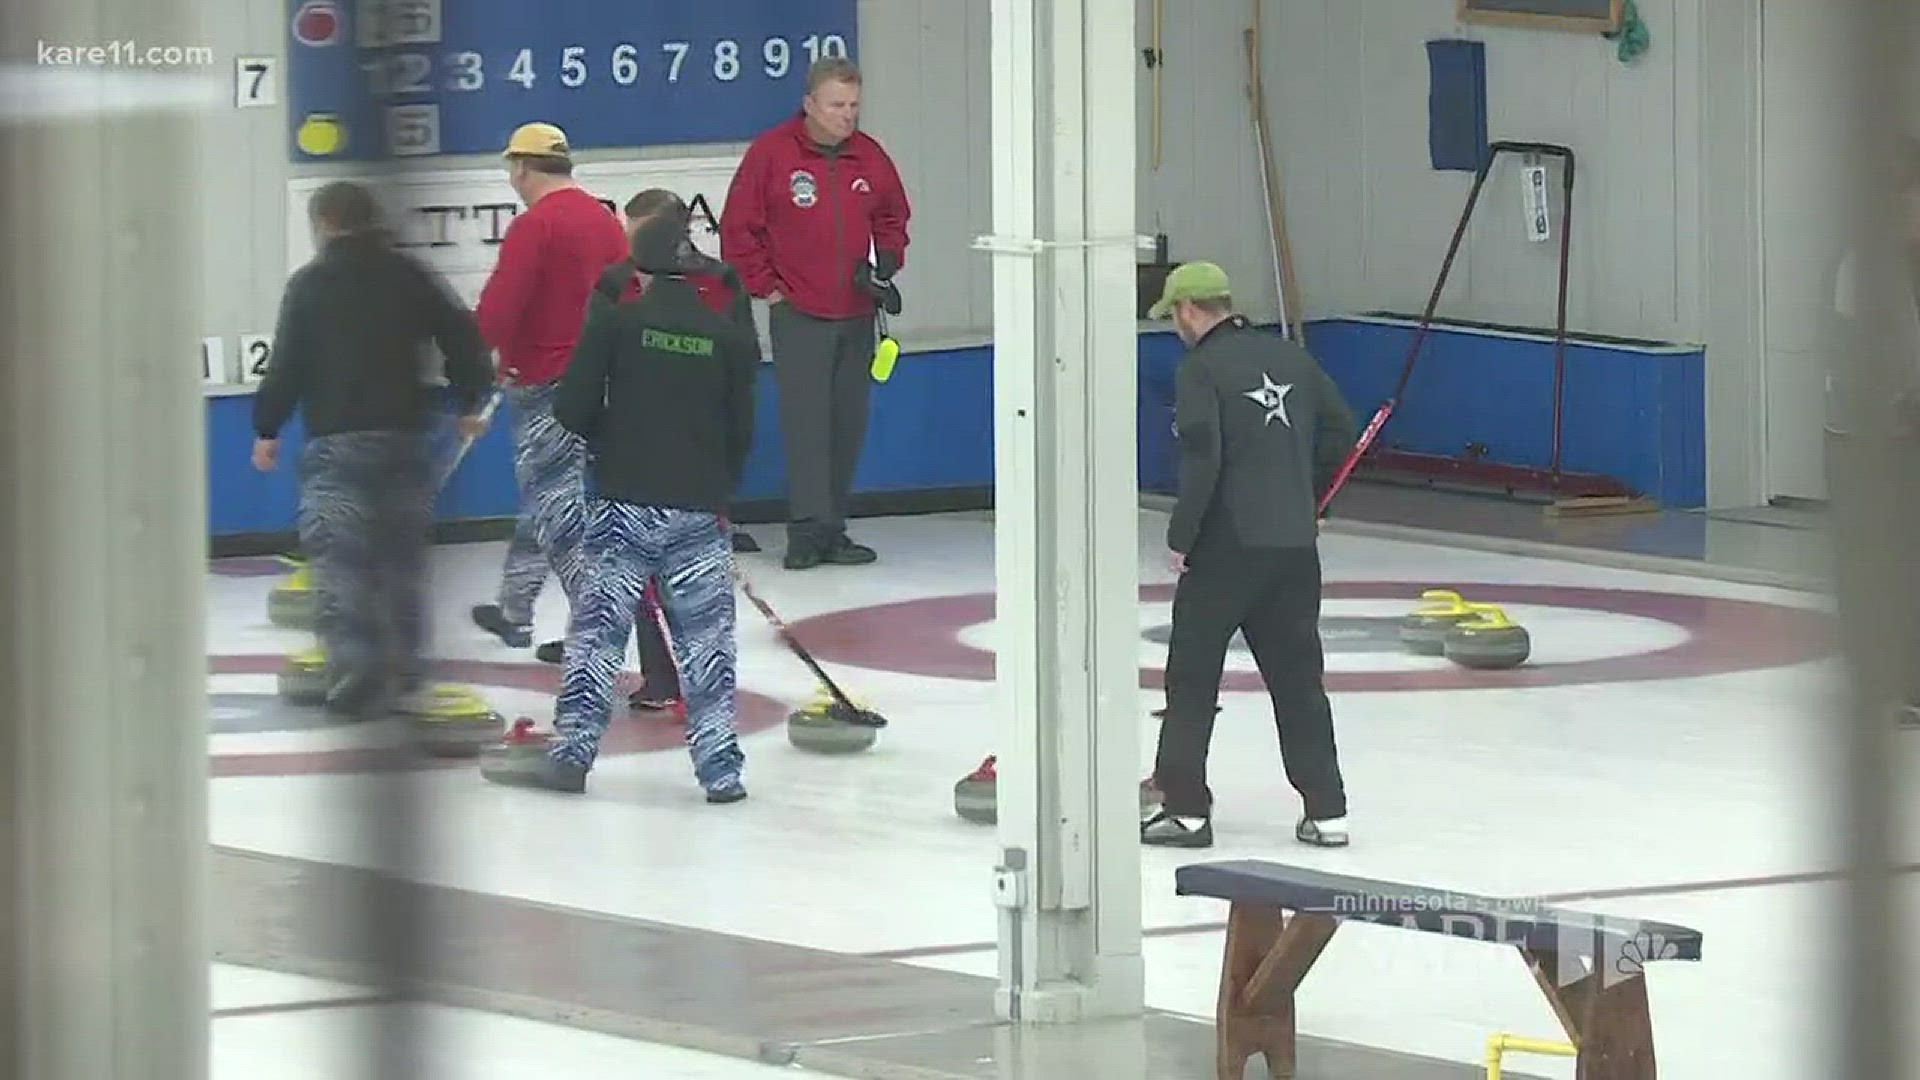 The St. Paul Curling Club was a happy place as friends and fellow curlers celebrated the Team Shuster gold medal. http://kare11.tv/2ERjK20